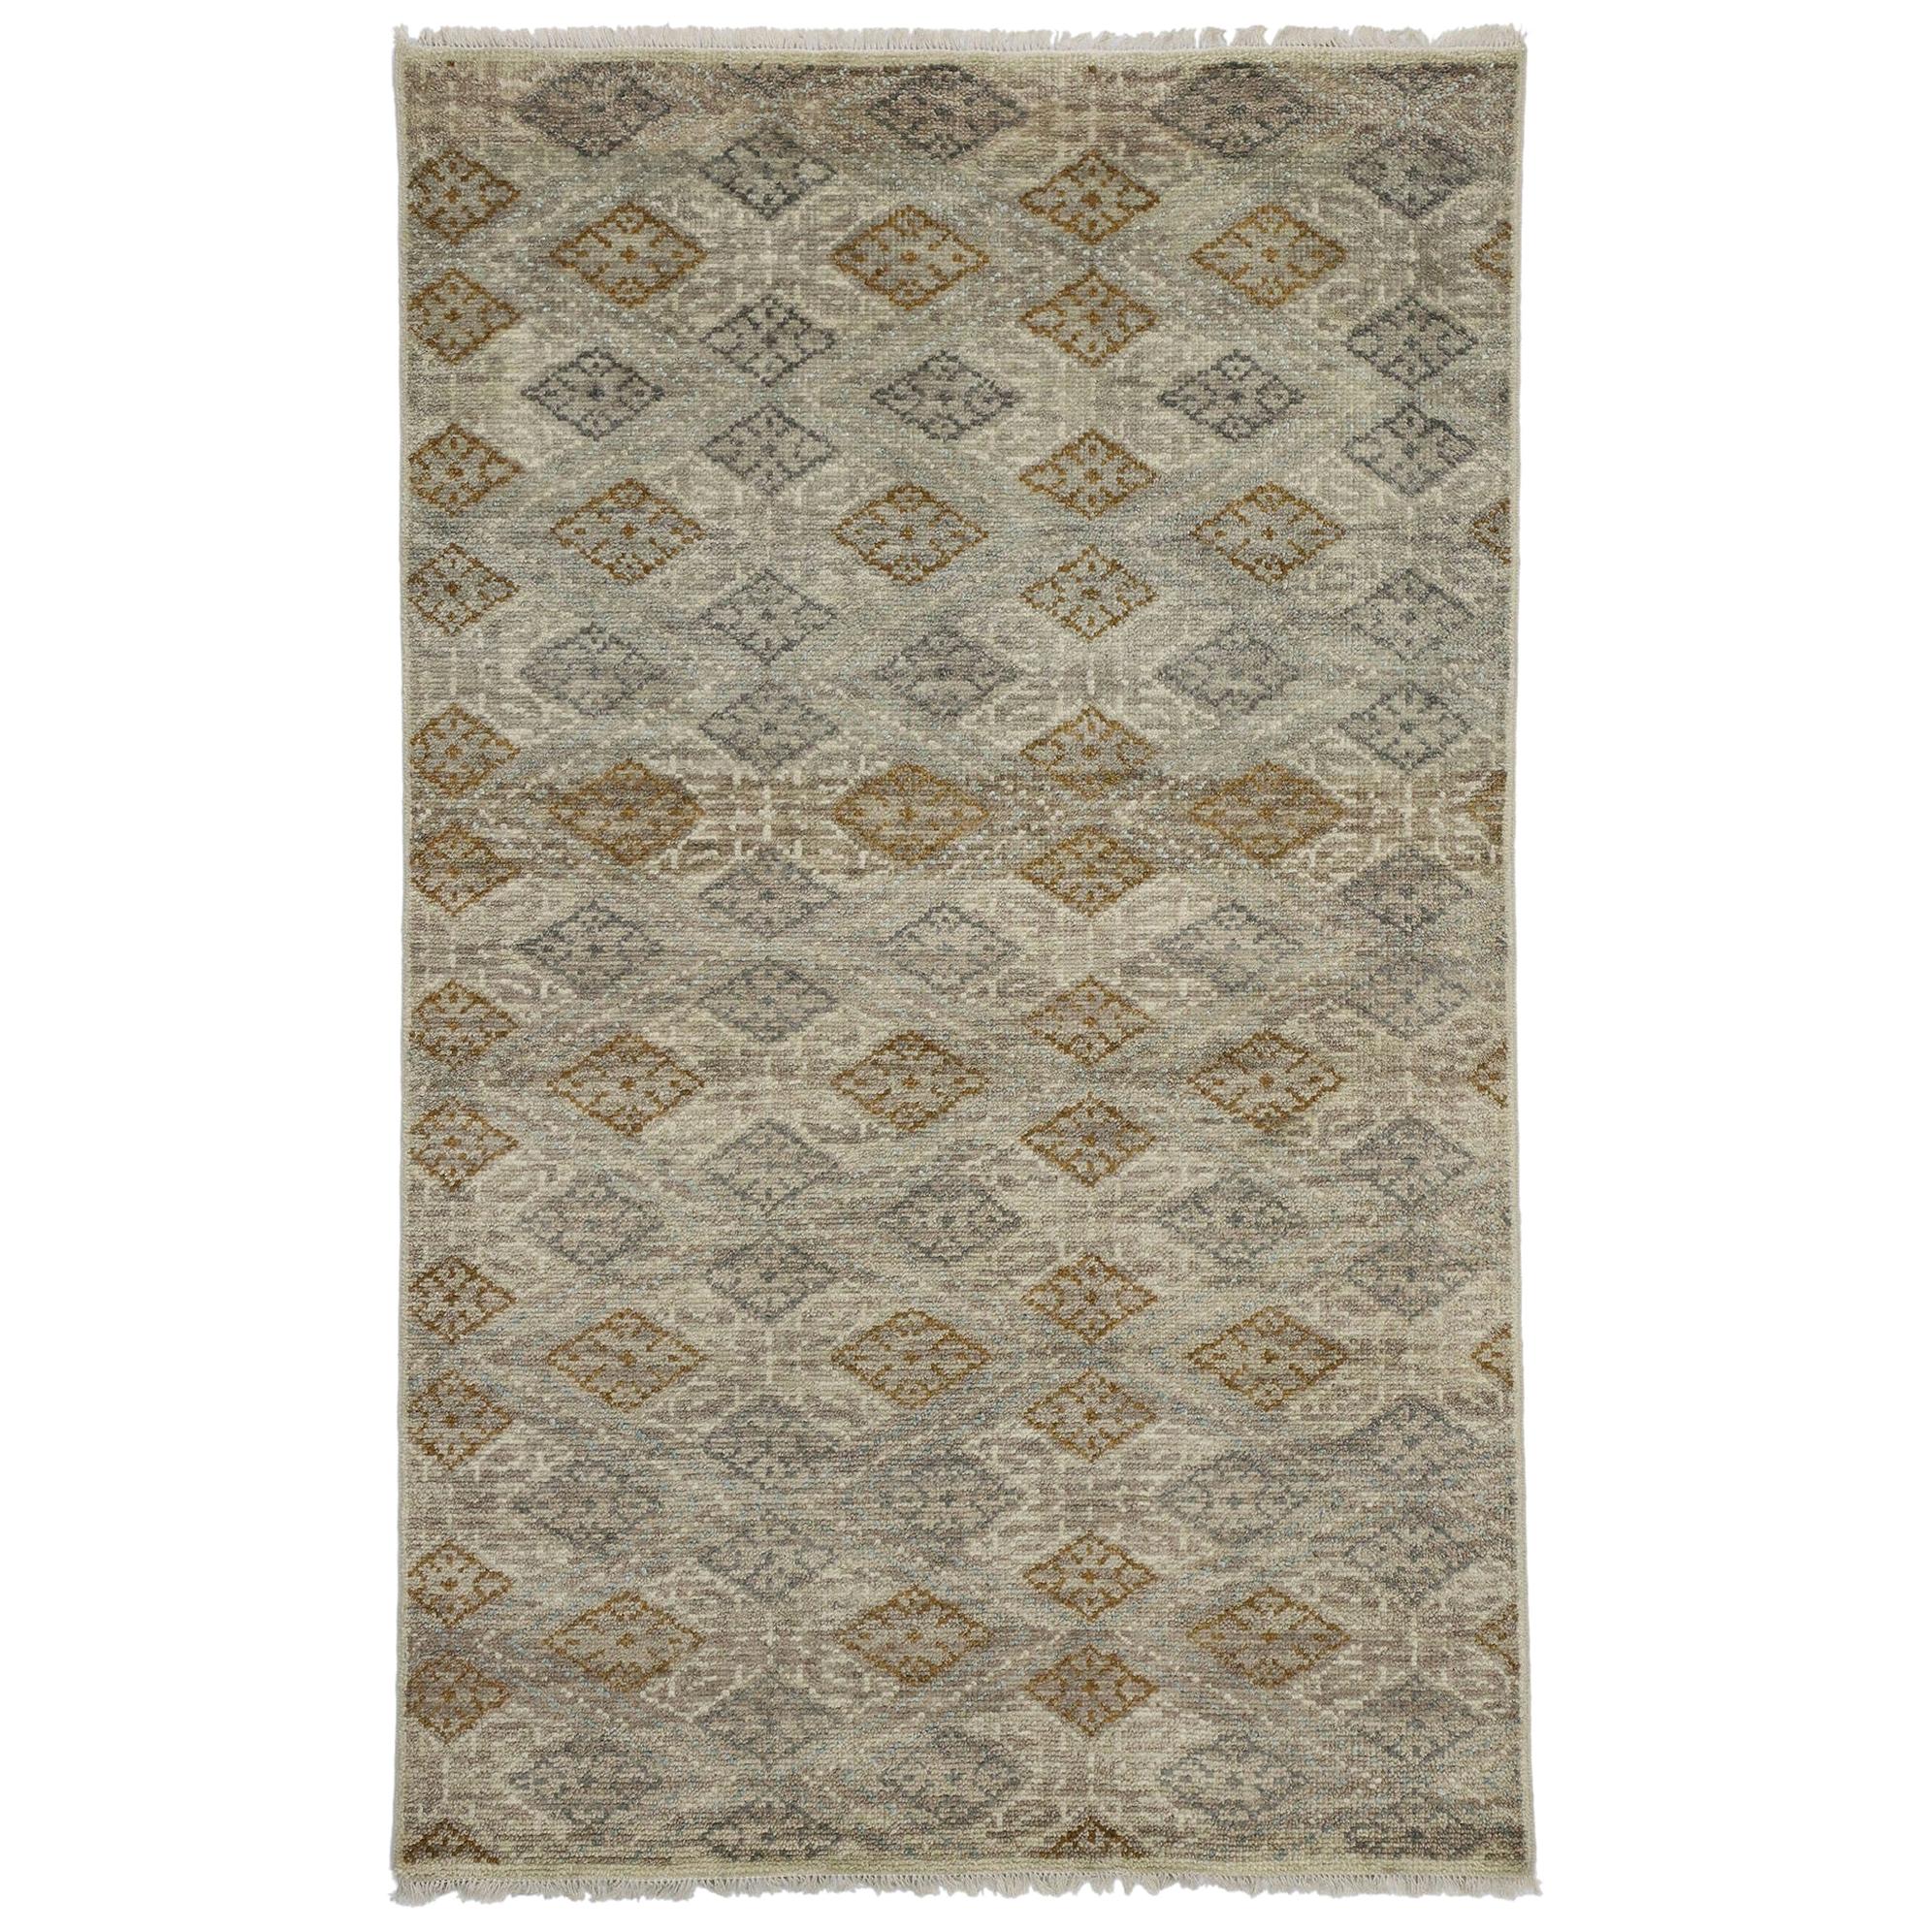 New Transitional Area Rug with Artisan Style and Geometric Pattern